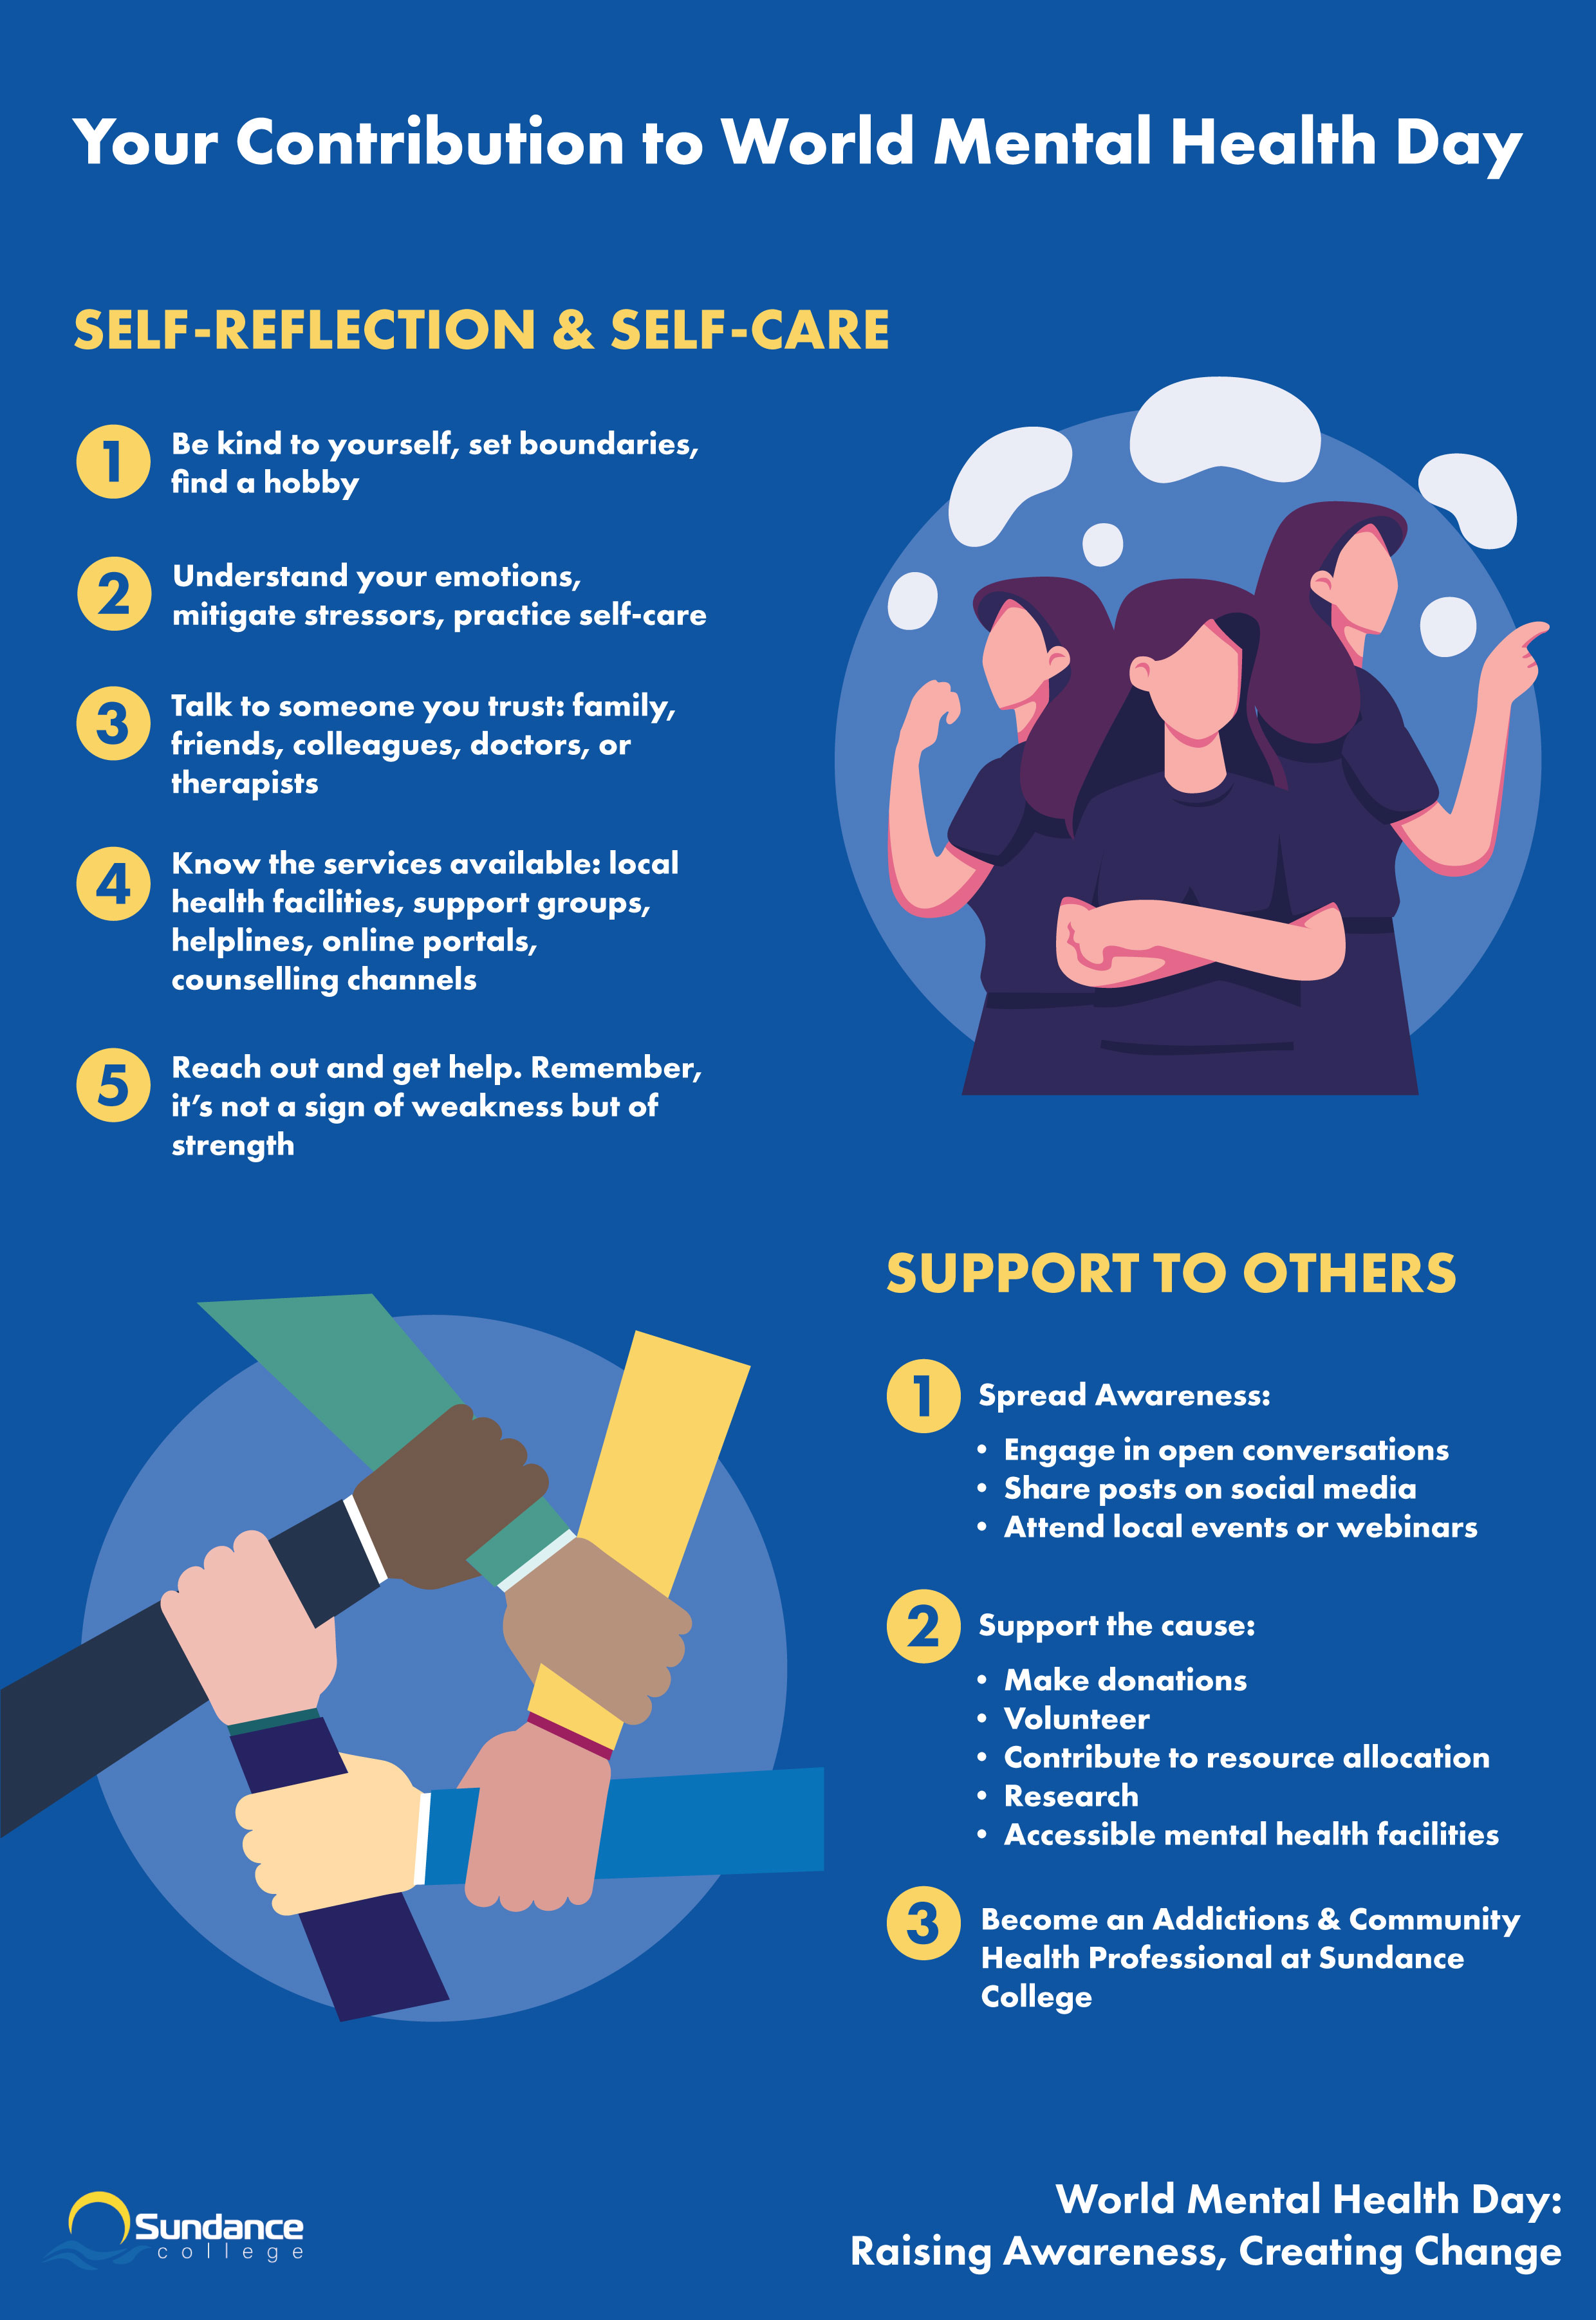  The infographic made by the Sundance College about Your Contribution to World Mental Health Day including Self-Reflection and Self-Care and Support to Others steps.